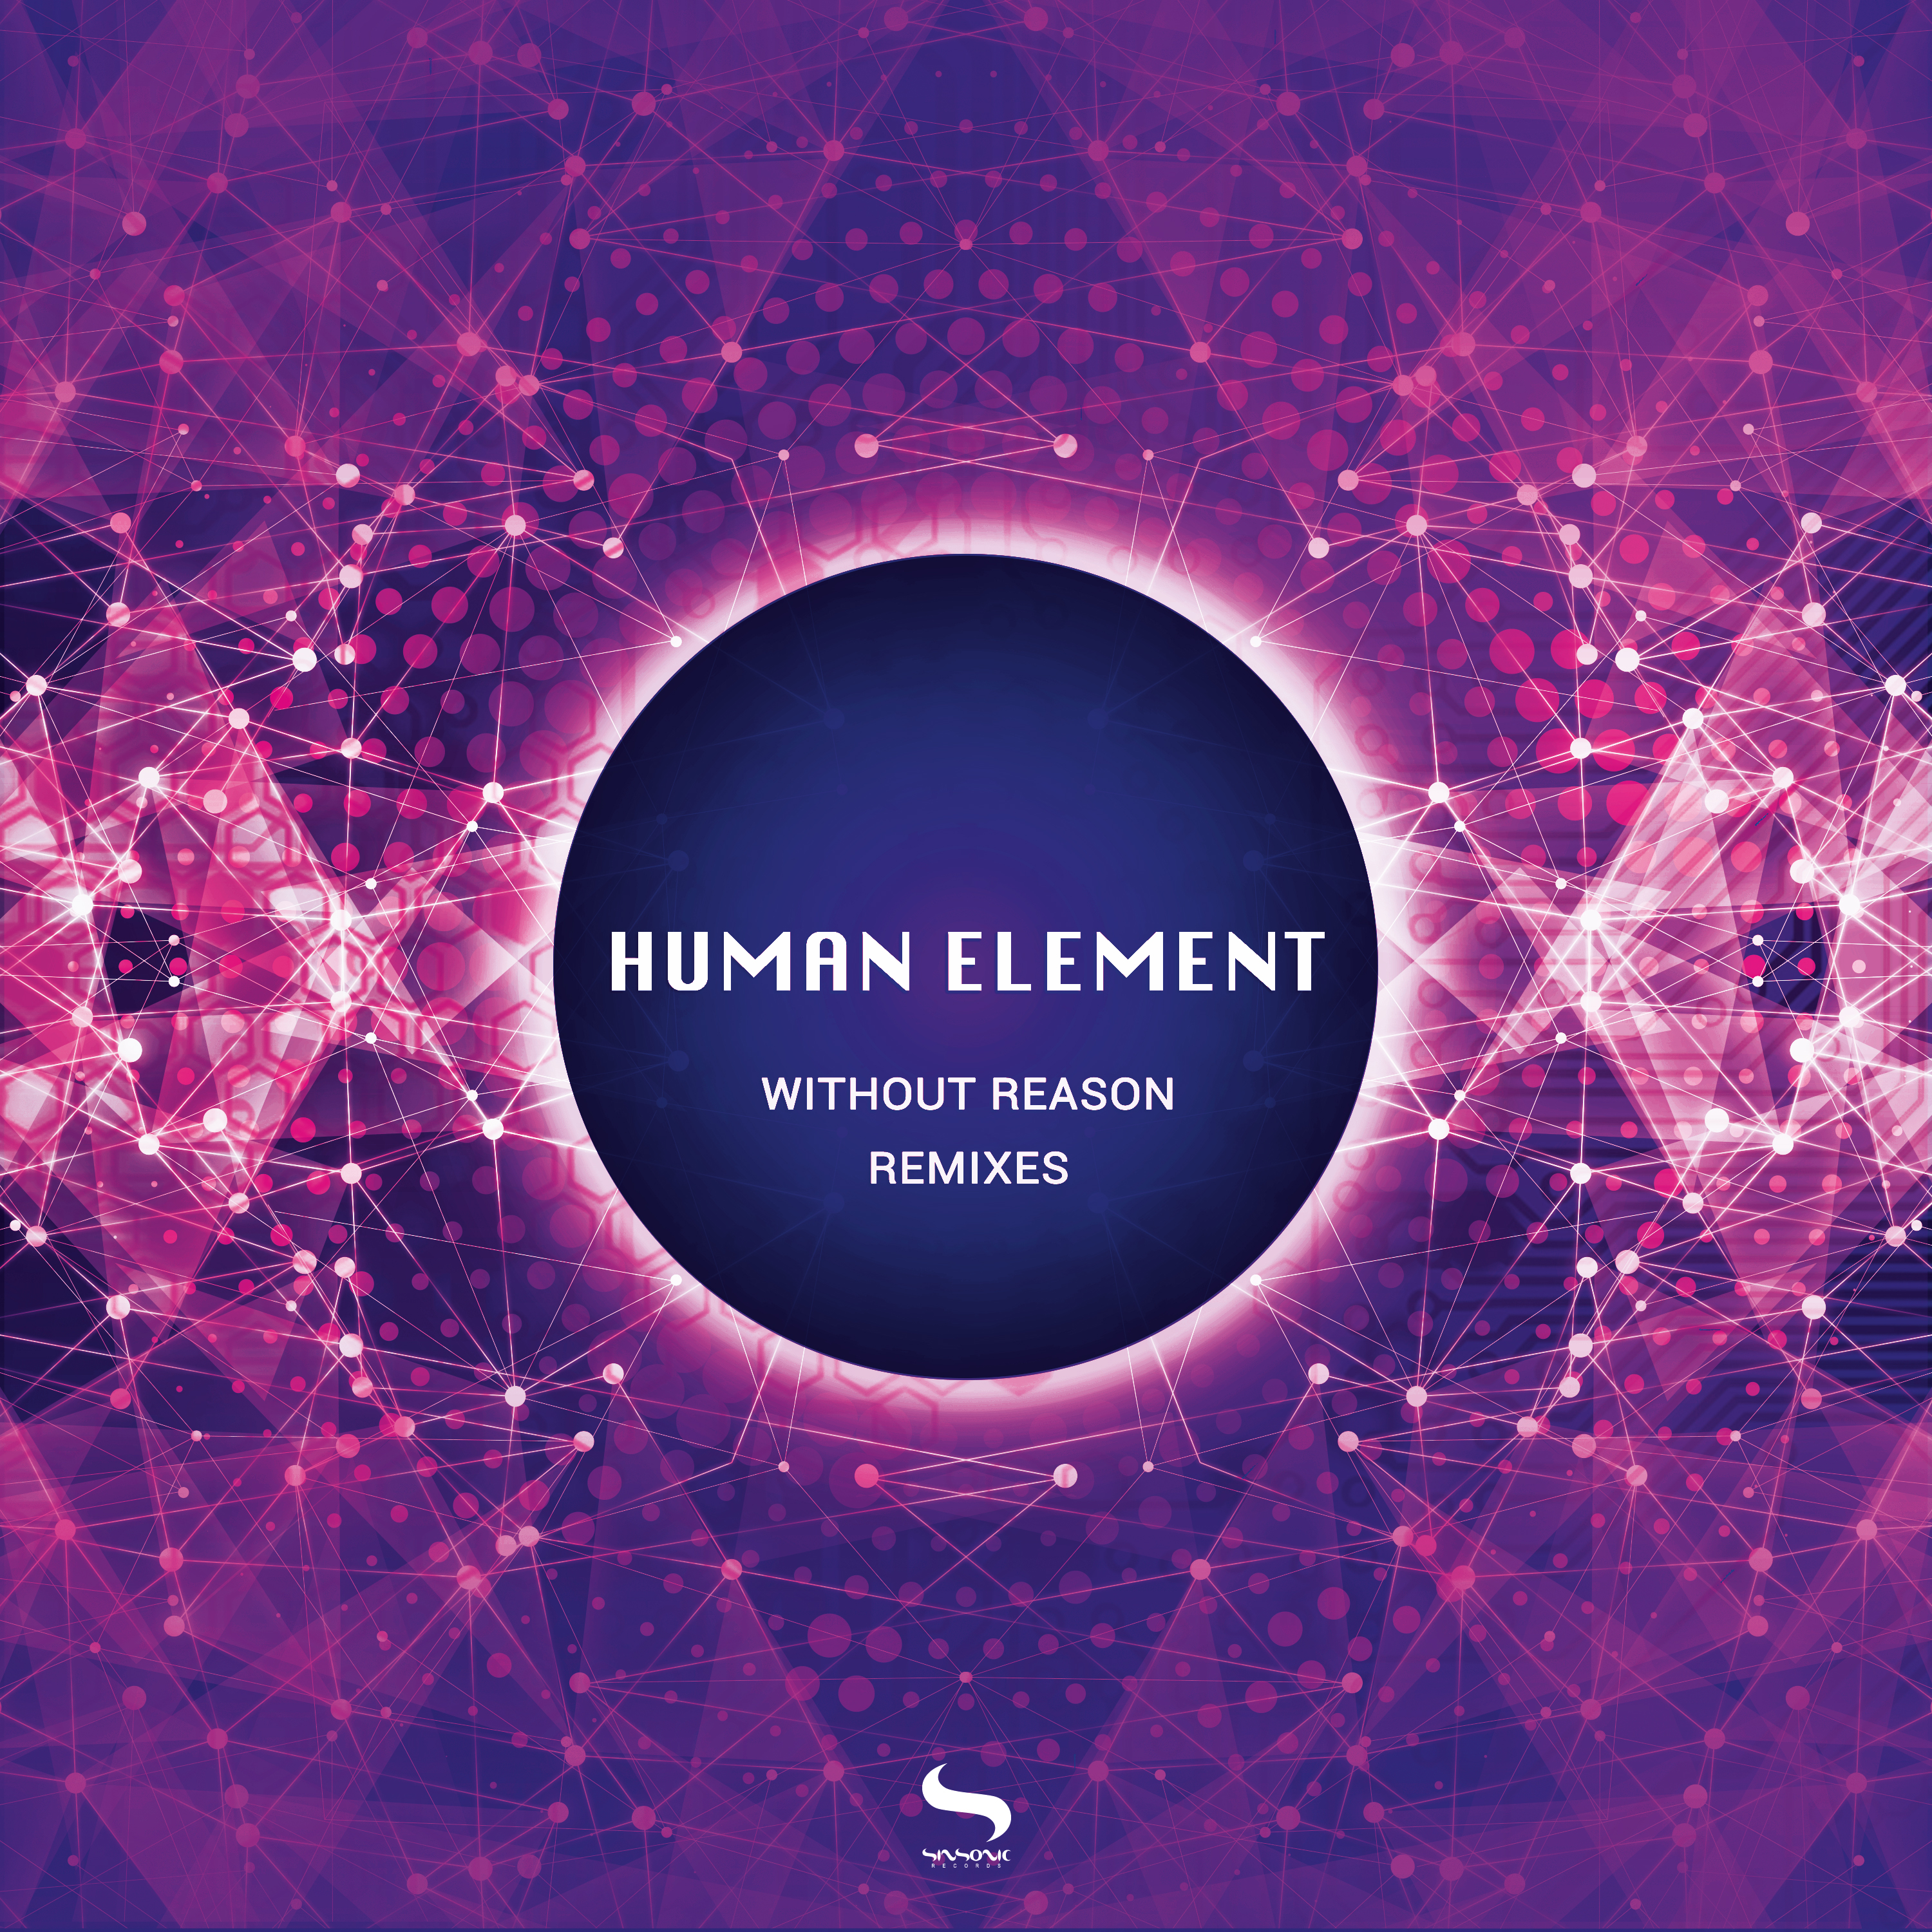 E reason. Хуман элемент. Remixes. Without reason. Human elements Lable.